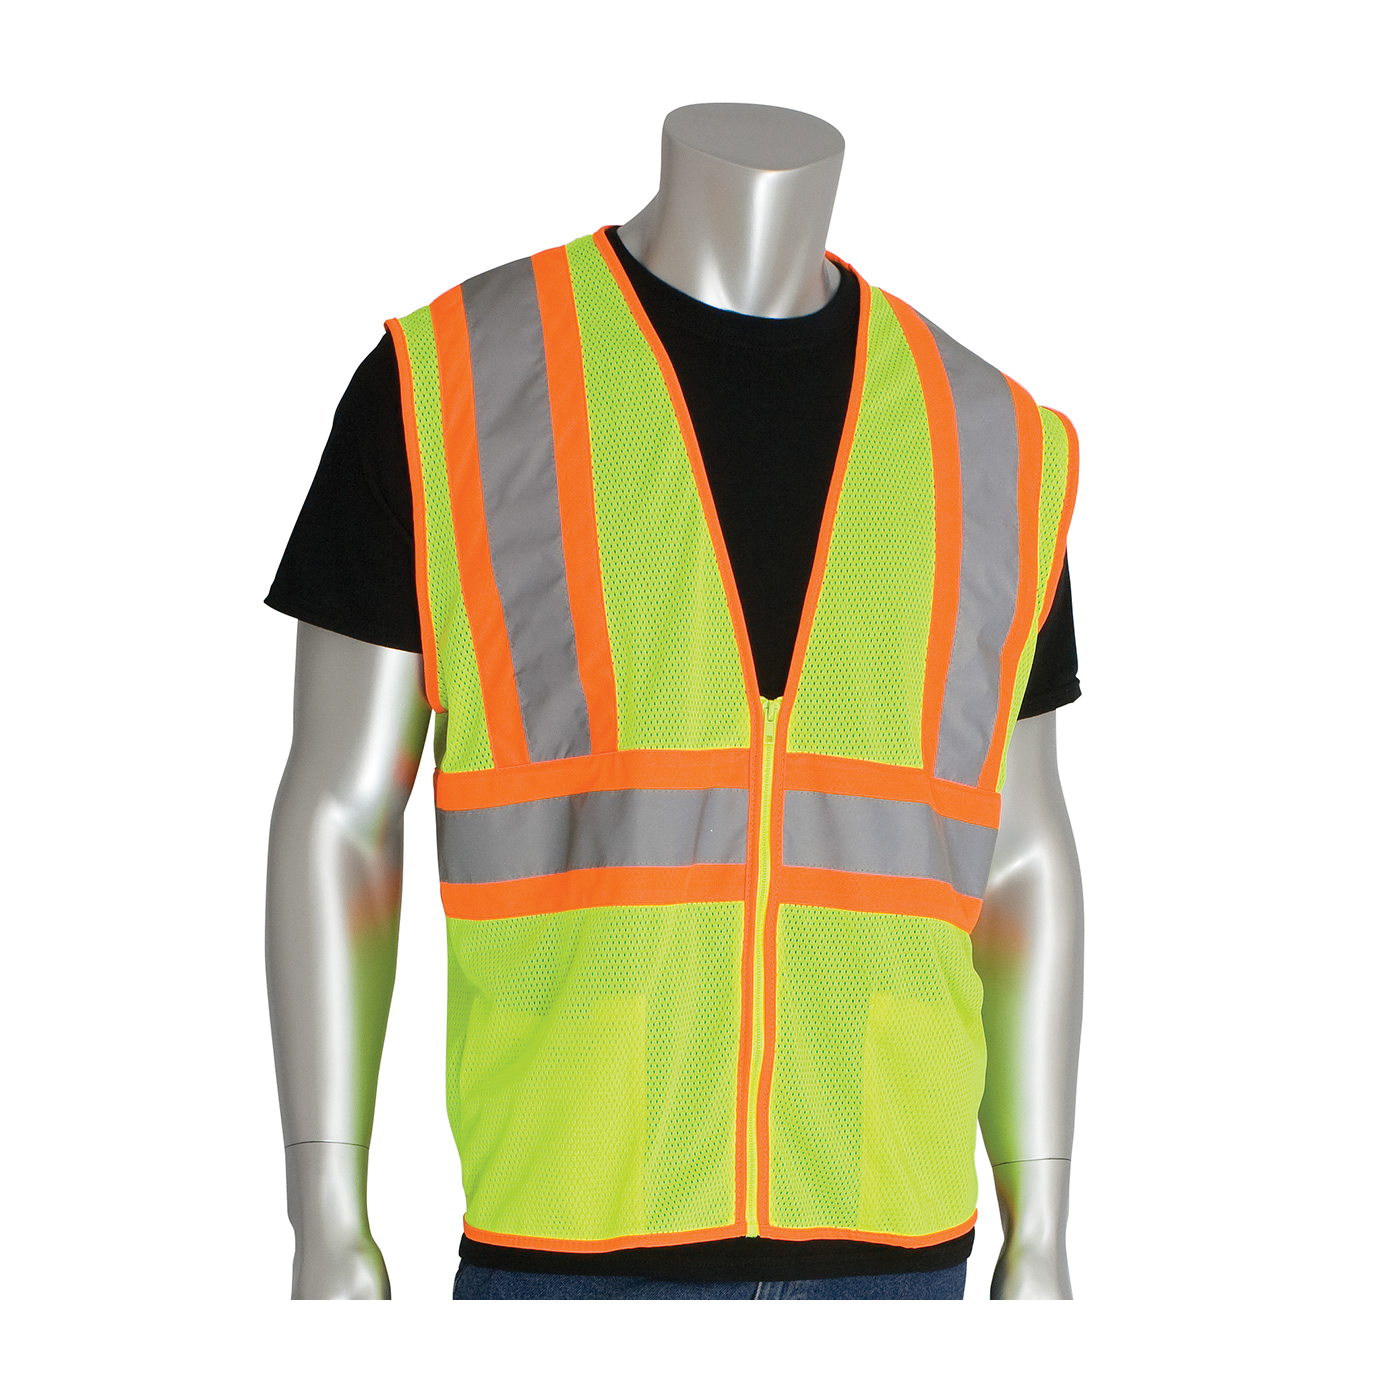 PIP® 302-MVLY-XL 2-Tone Safety Vest, XL, Hi-Viz Lime Yellow, Polyester Mesh, Zipper Closure, 2 Pockets, ANSI Class: Class 2, Specifications Met: ANSI 107 Type R